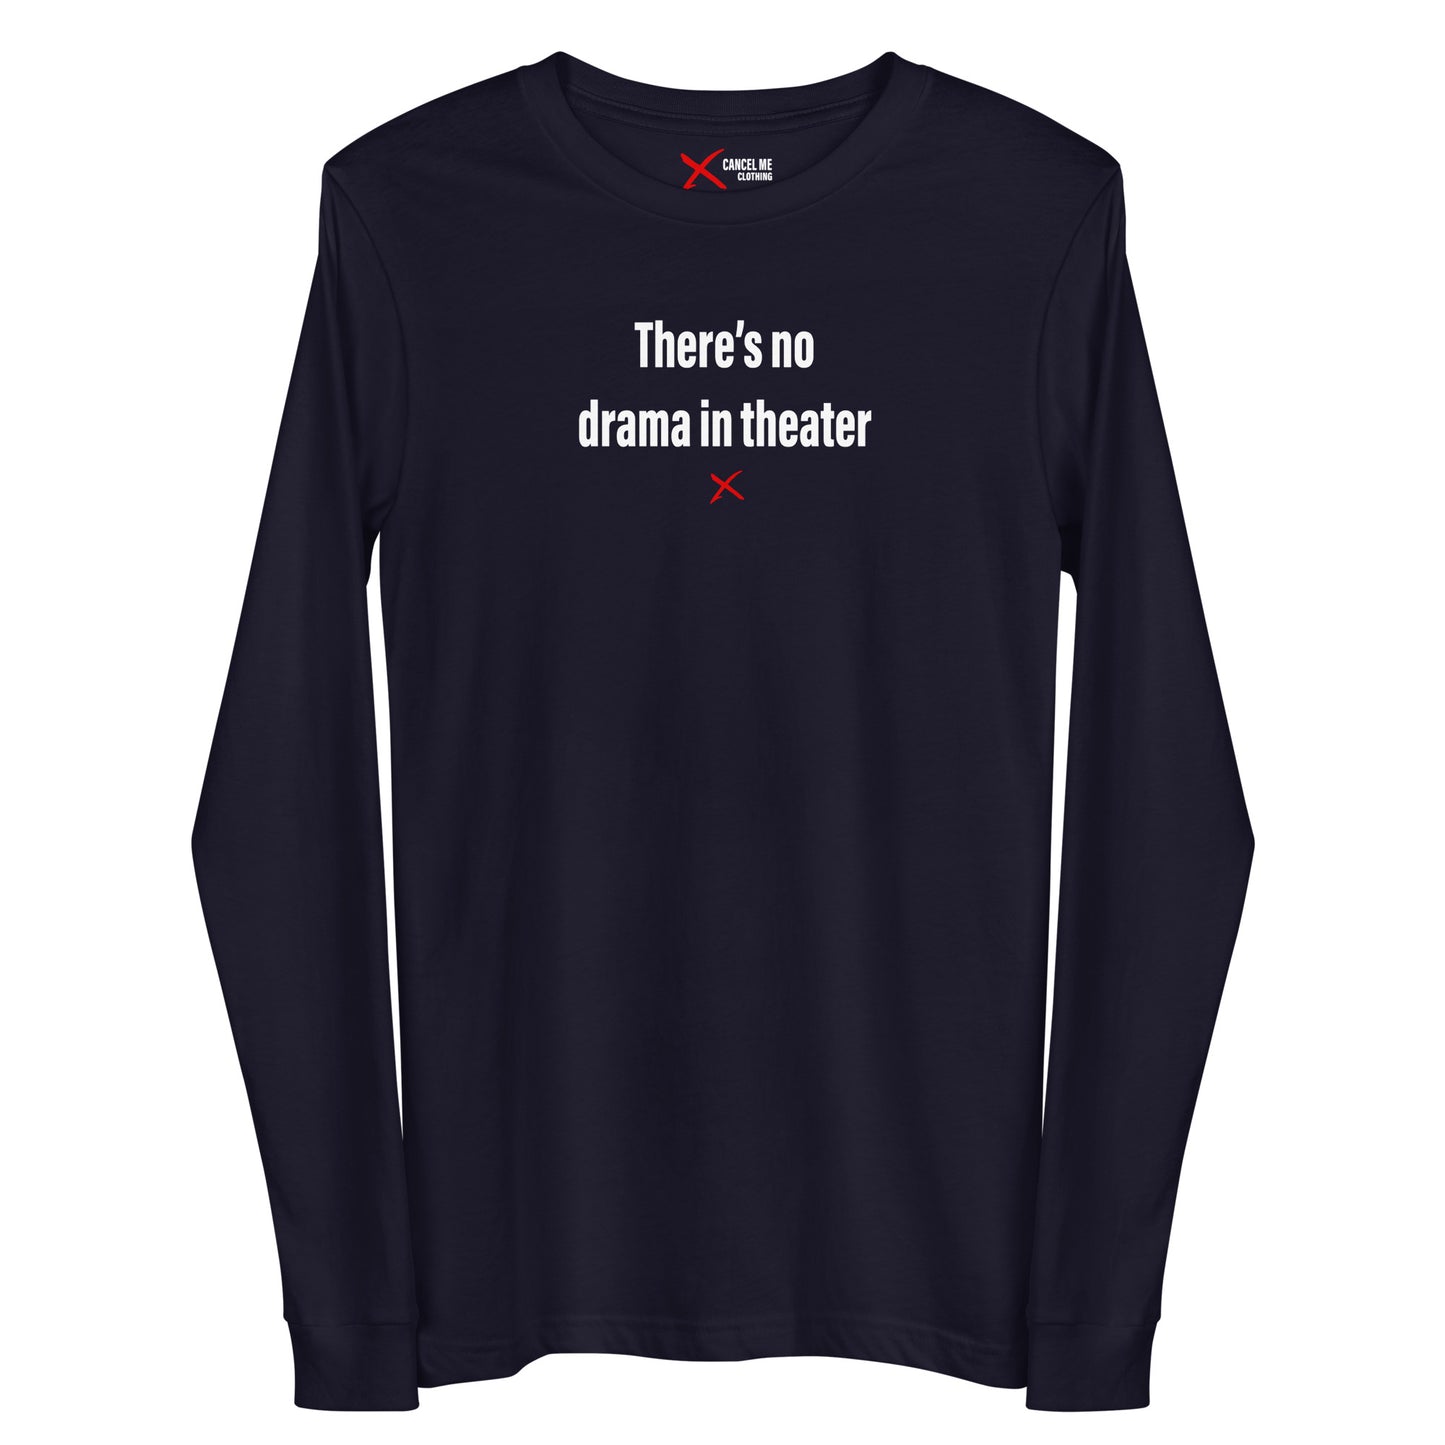 There's no drama in theater - Longsleeve